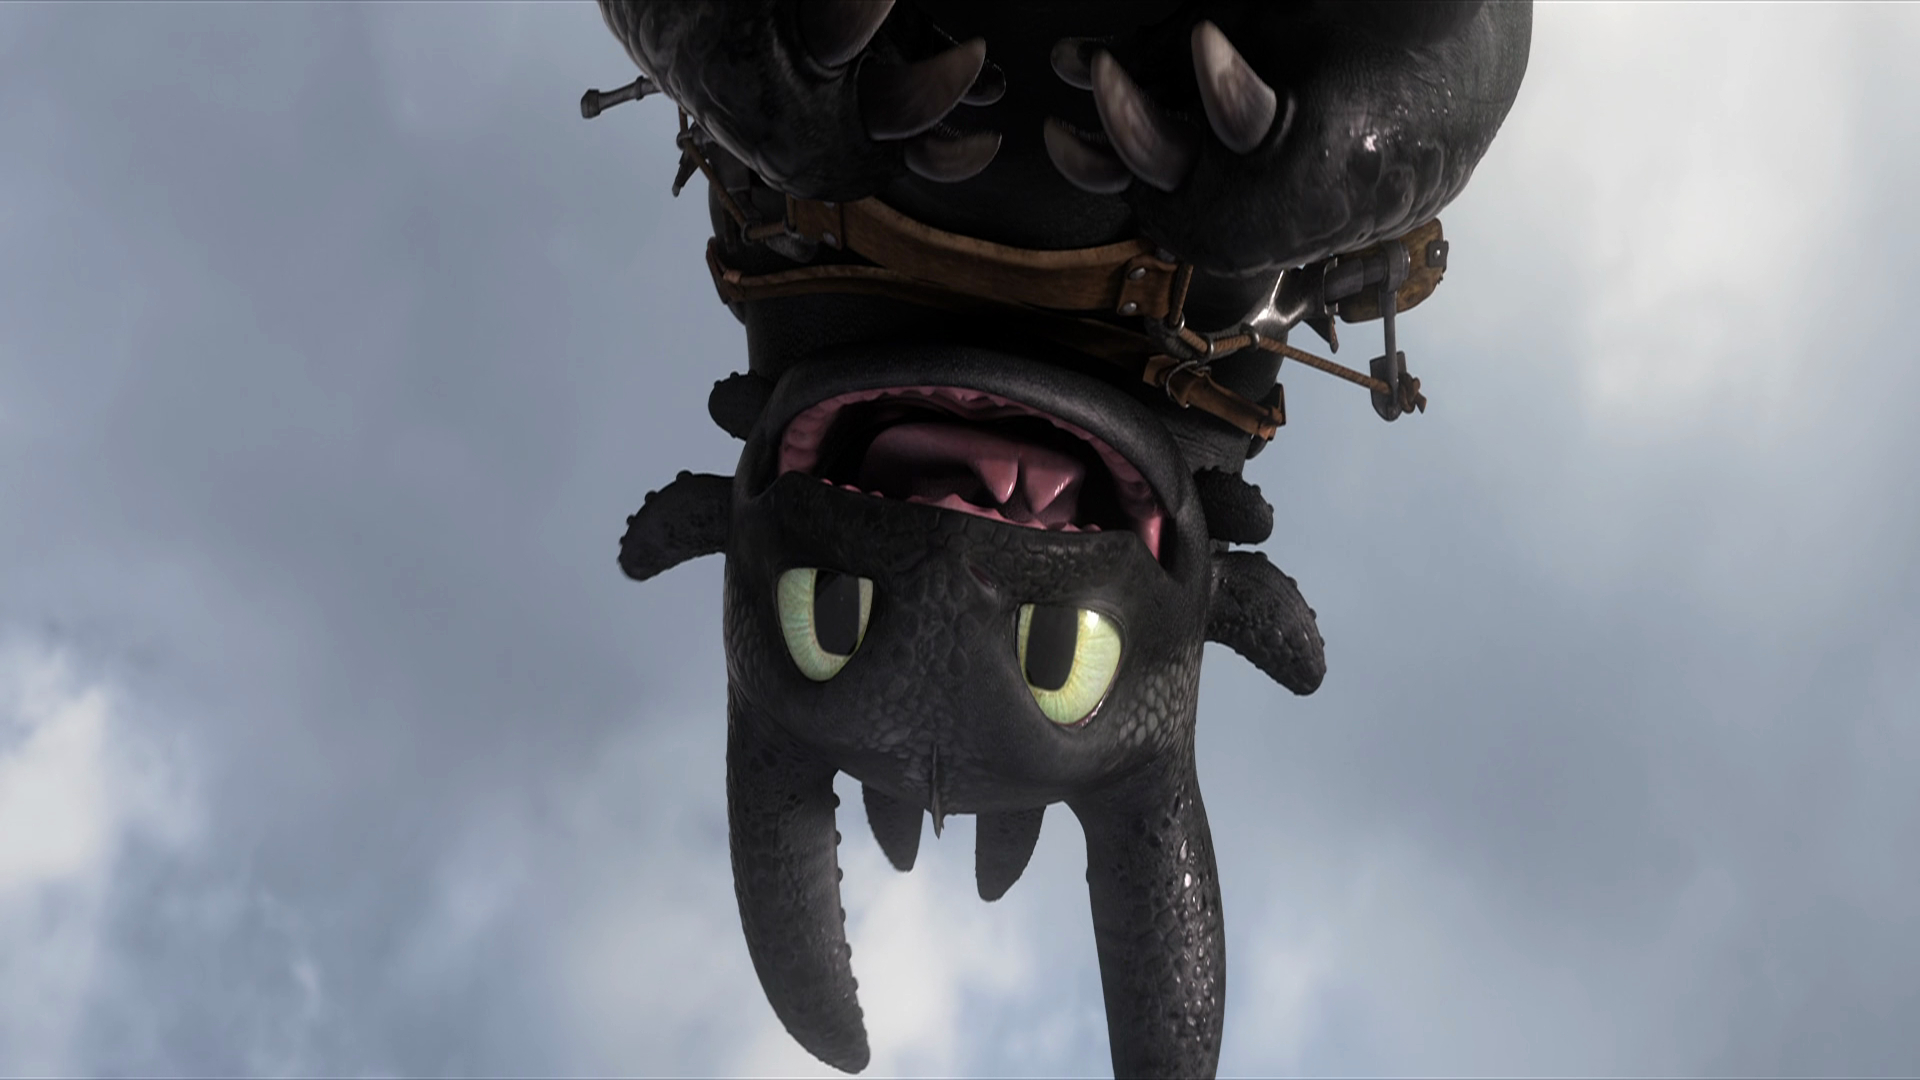 1920x1080 130+ Toothless (How to Train Your Dragon) HD Wallpapers and Backgrounds